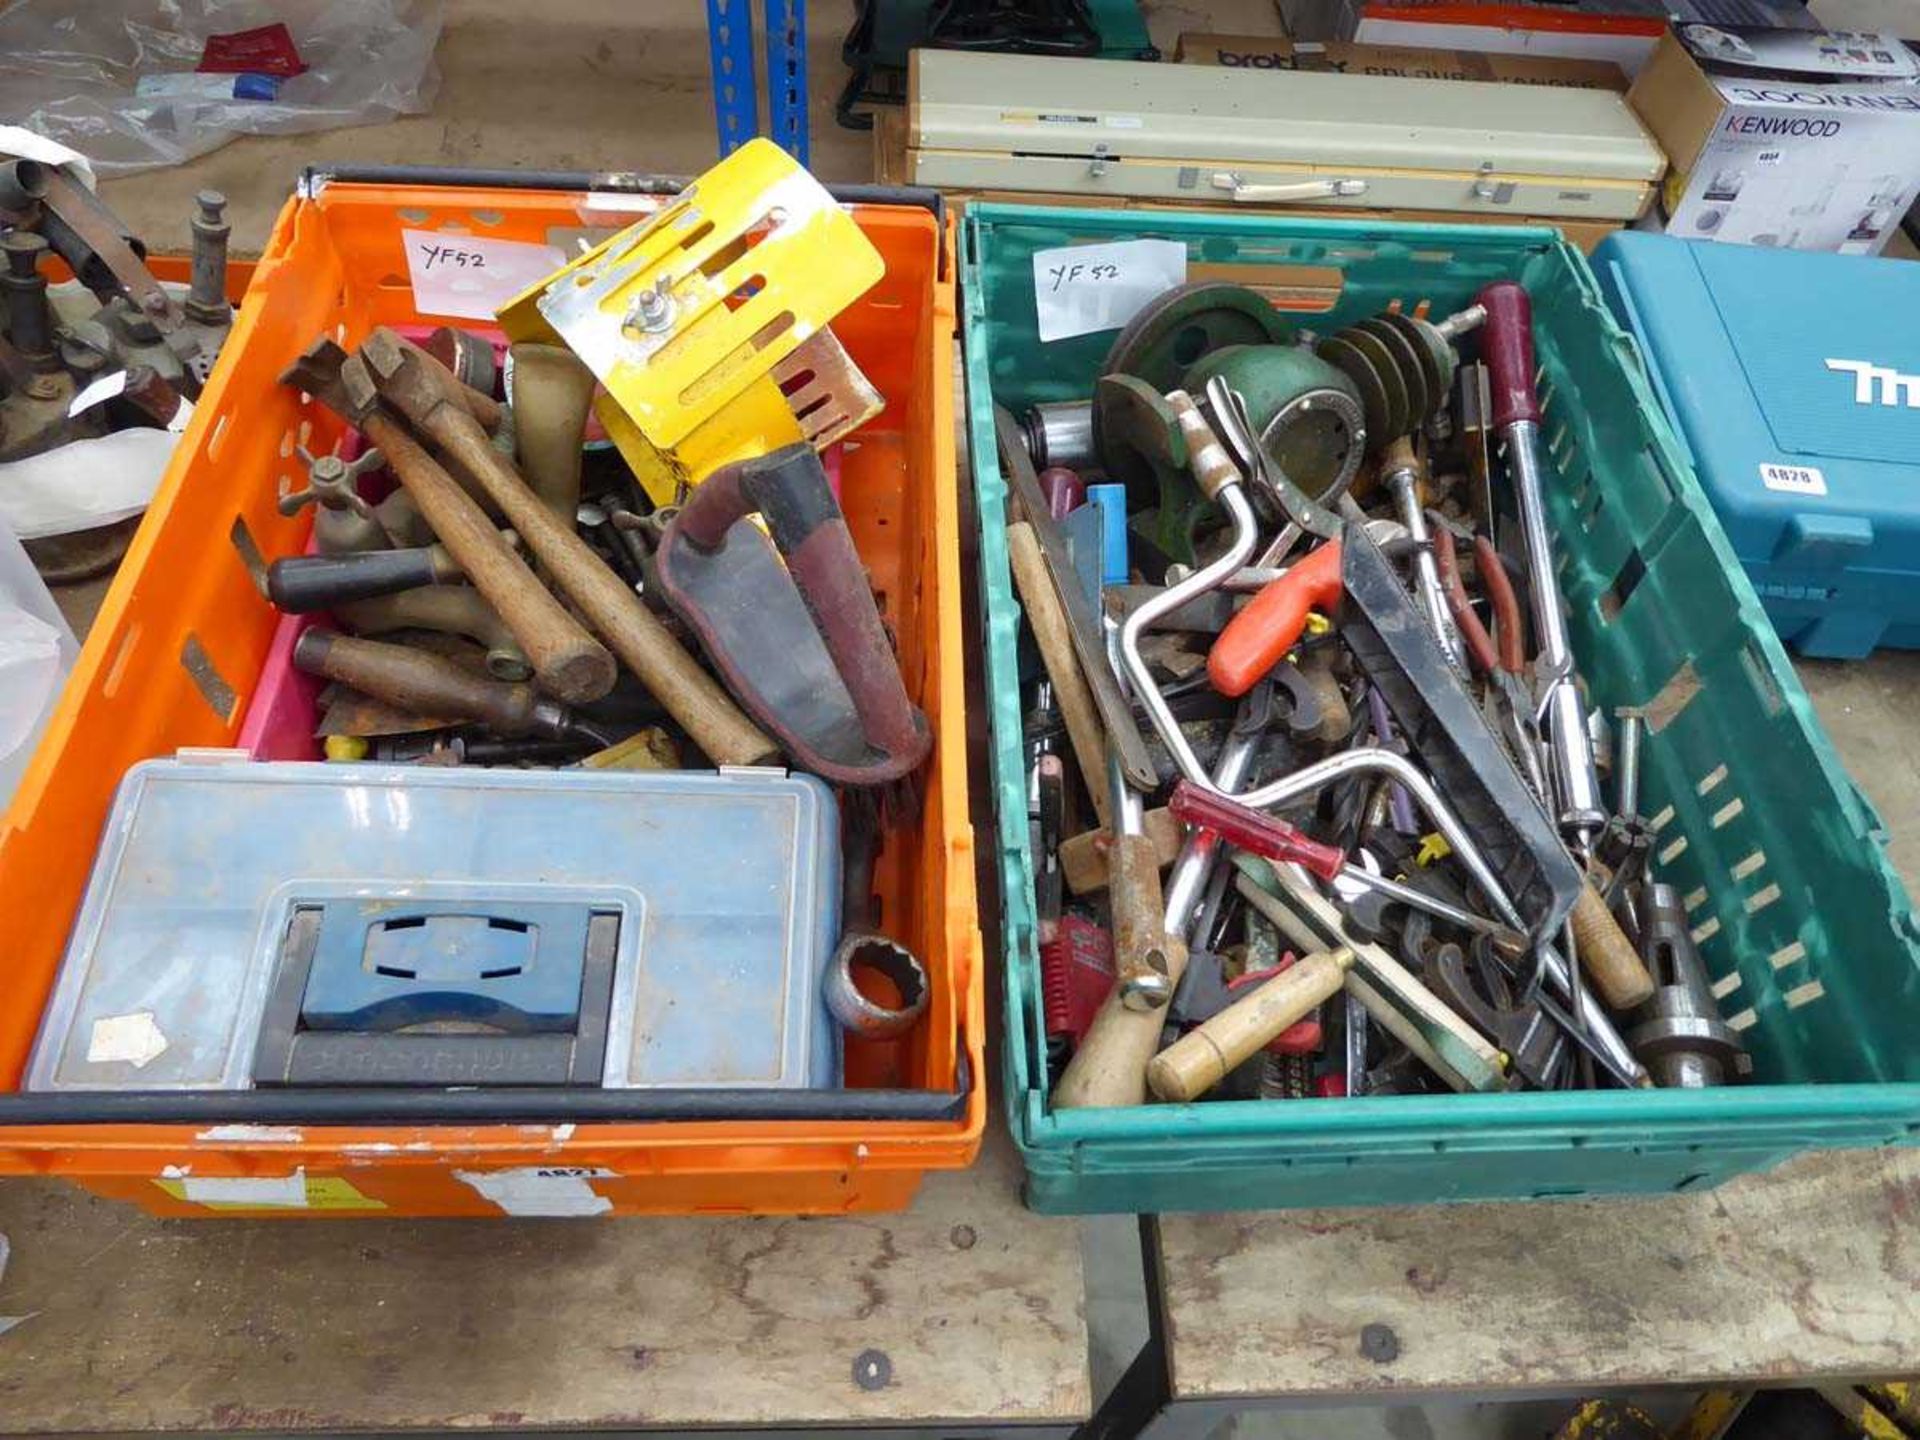 2 crates of assorted tools including wire brushes, hammers, taps, Yankee screwdrivers etc